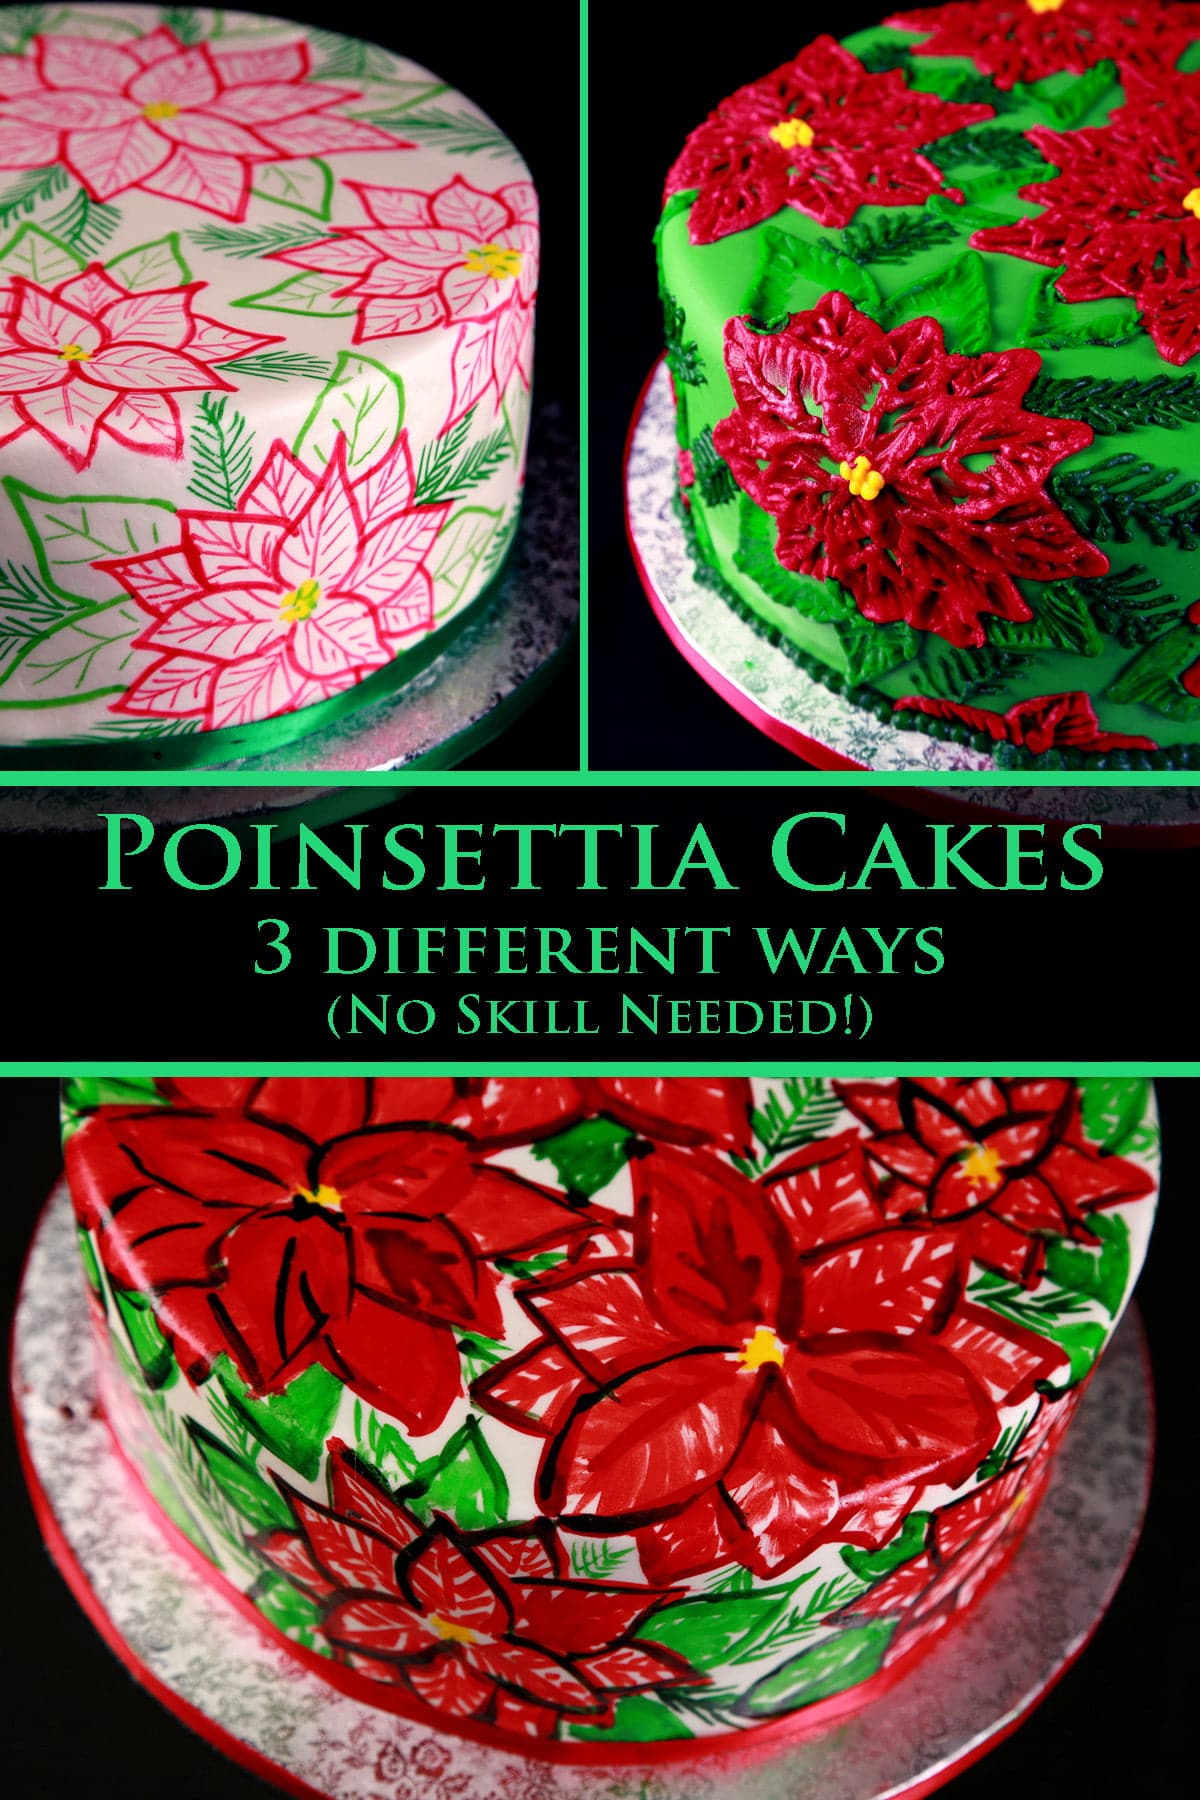 A collage image of 3 different round, Christmas Poinsettia Cakes, in shades of red and green.